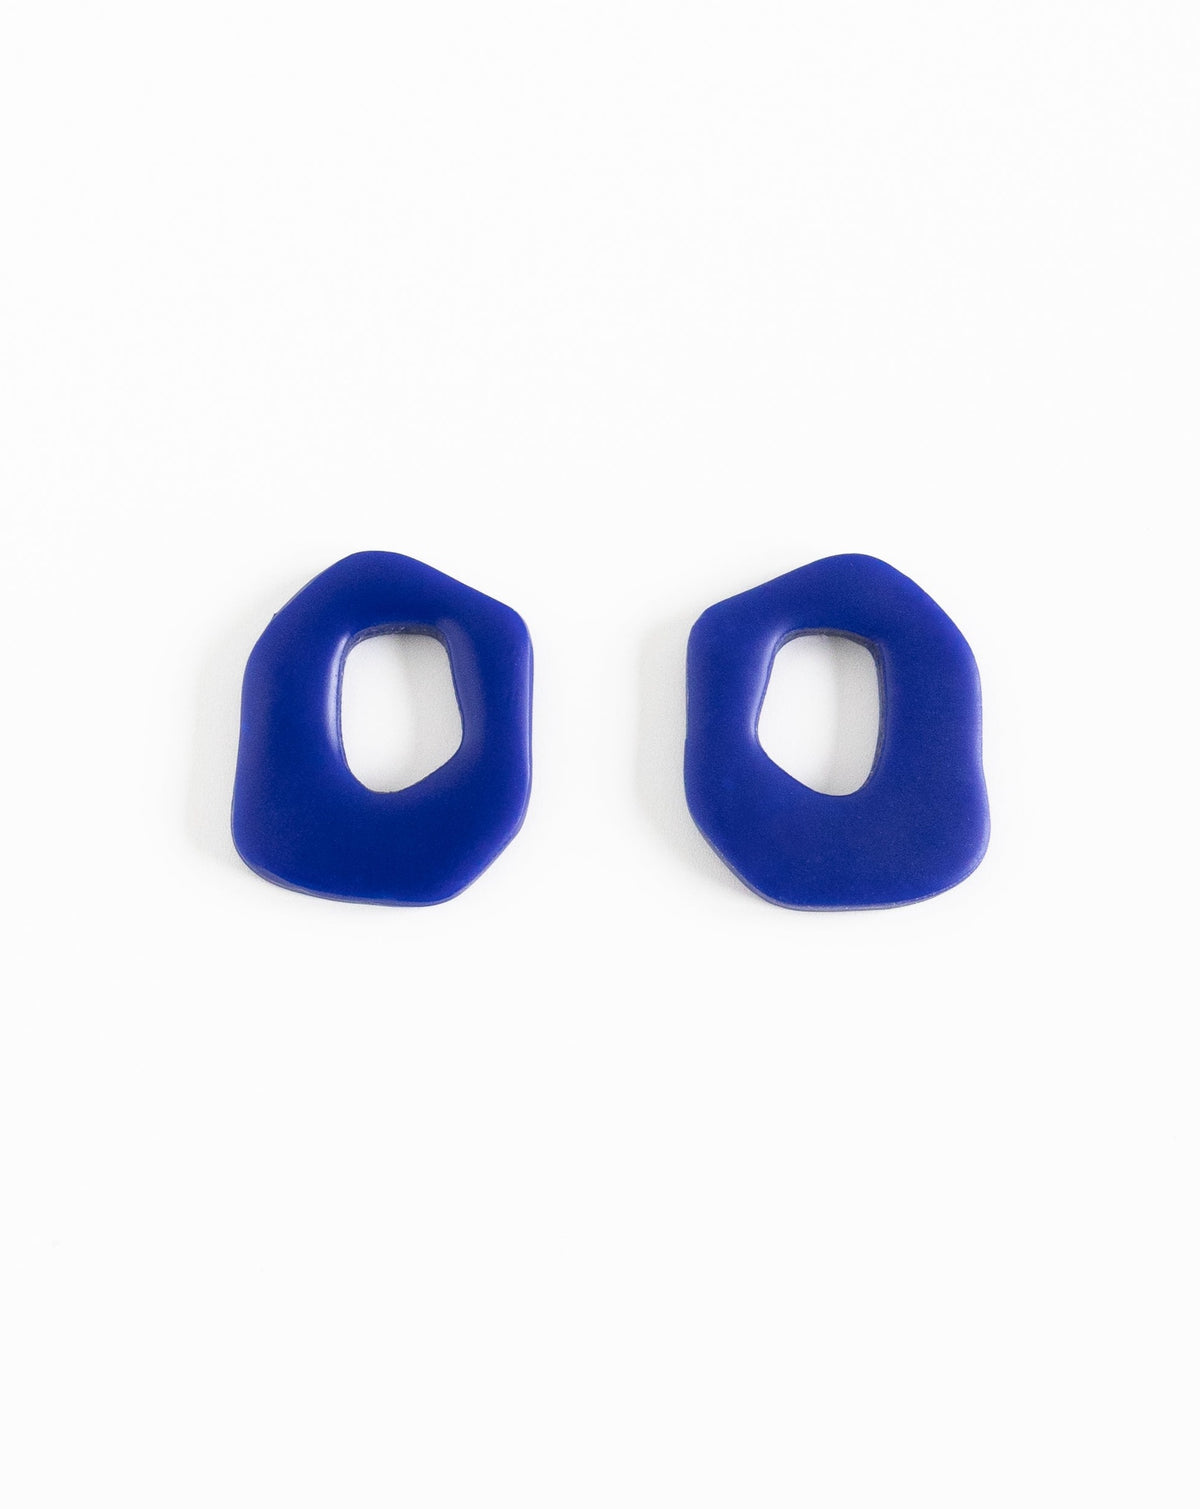 Close up of Darien Beads in Hue Blue color, front view